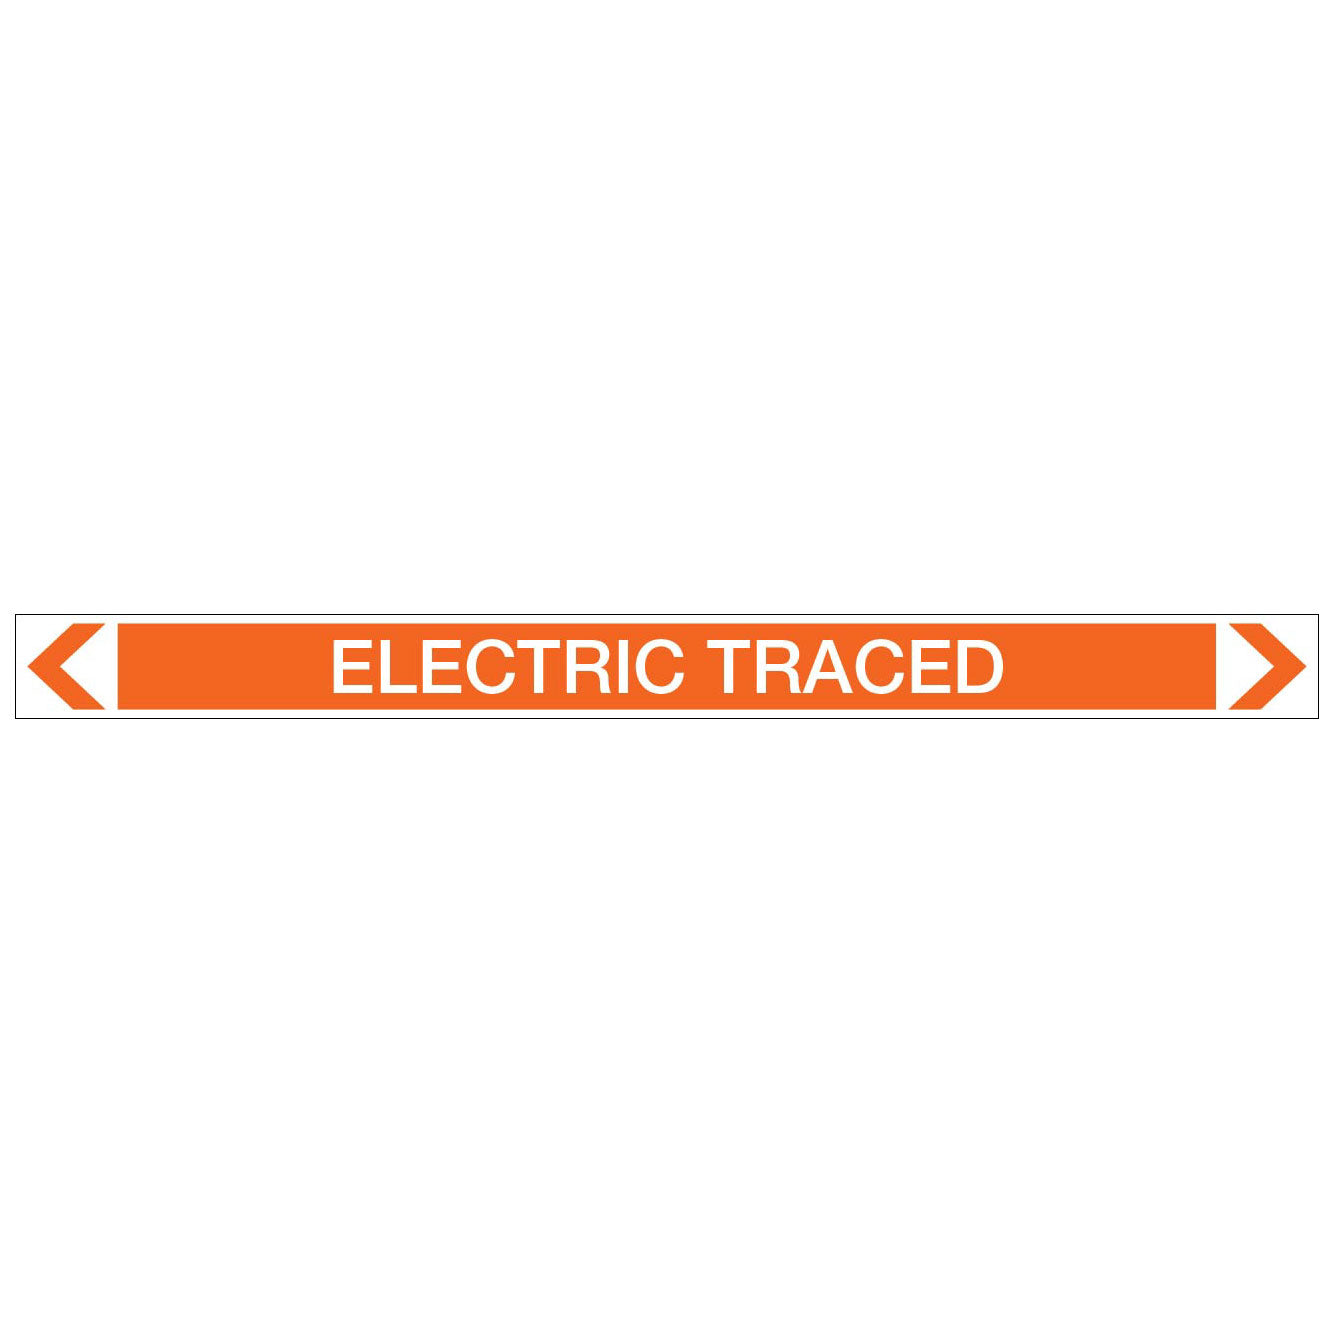 Electrical - Electric Traced - Pipe Marker Sticker